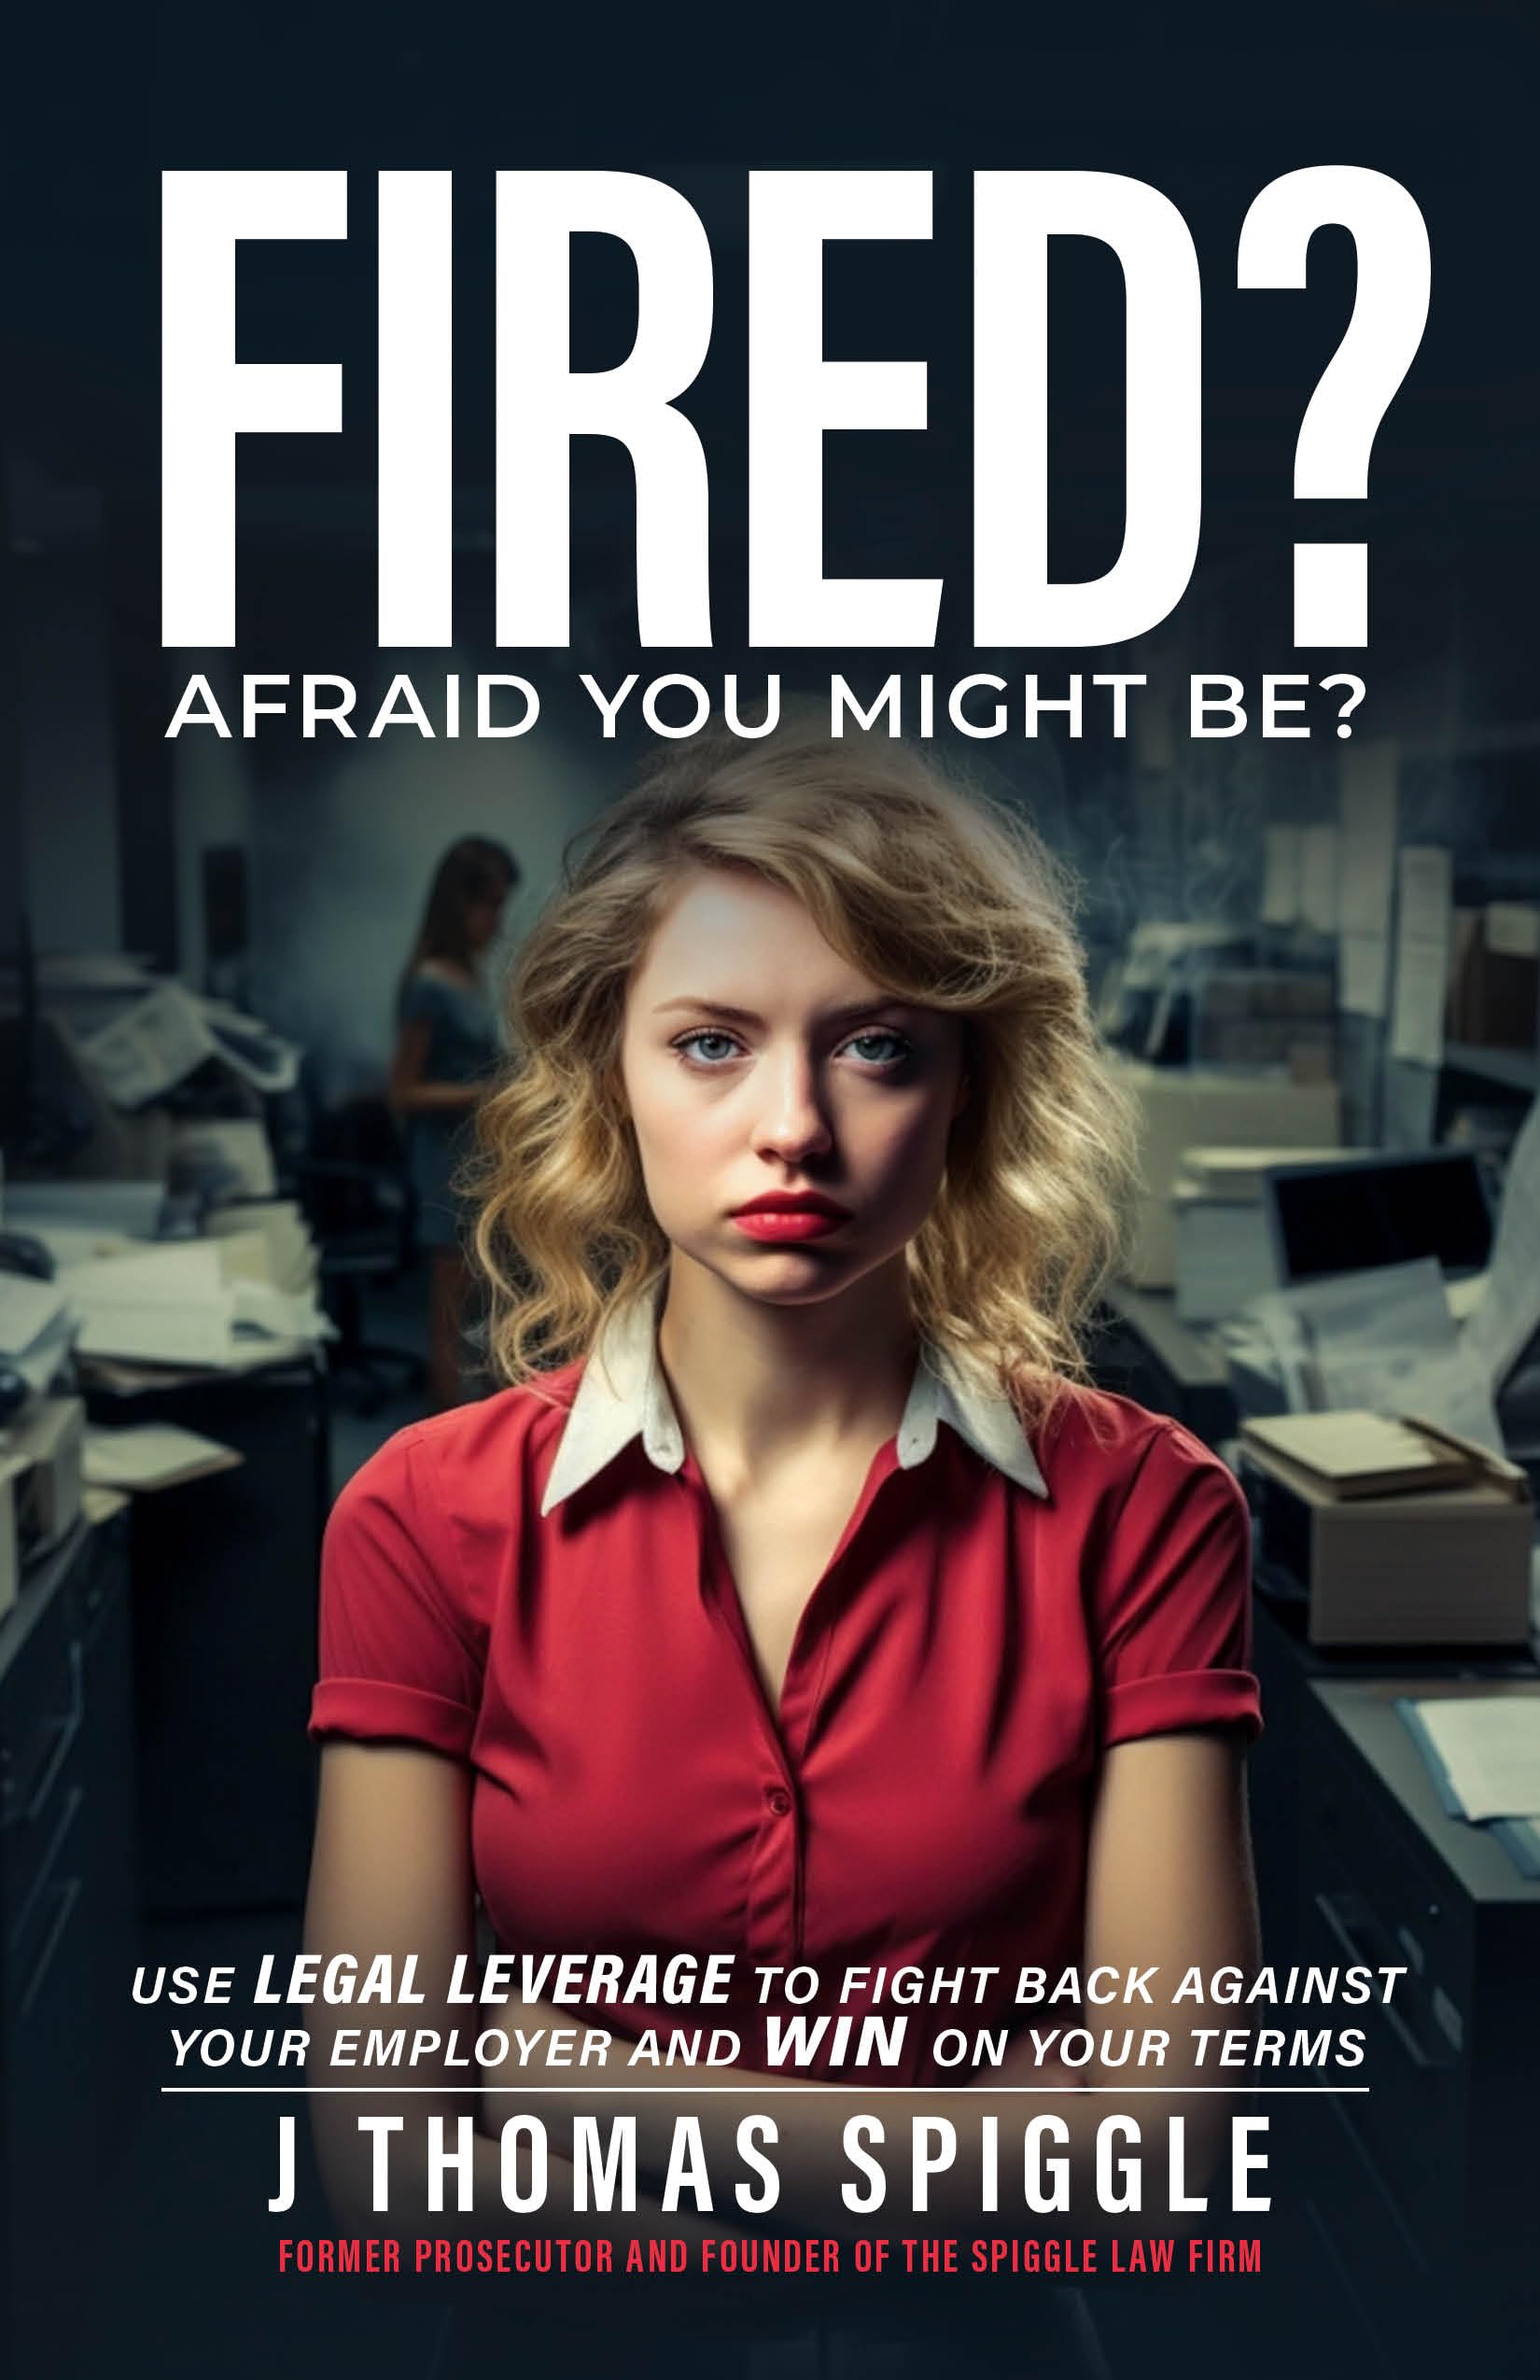 Fired? Afraid You Might Be?: Use Legal Leverage to fight back against your employer and win on your terms (Fired Book Book 2)